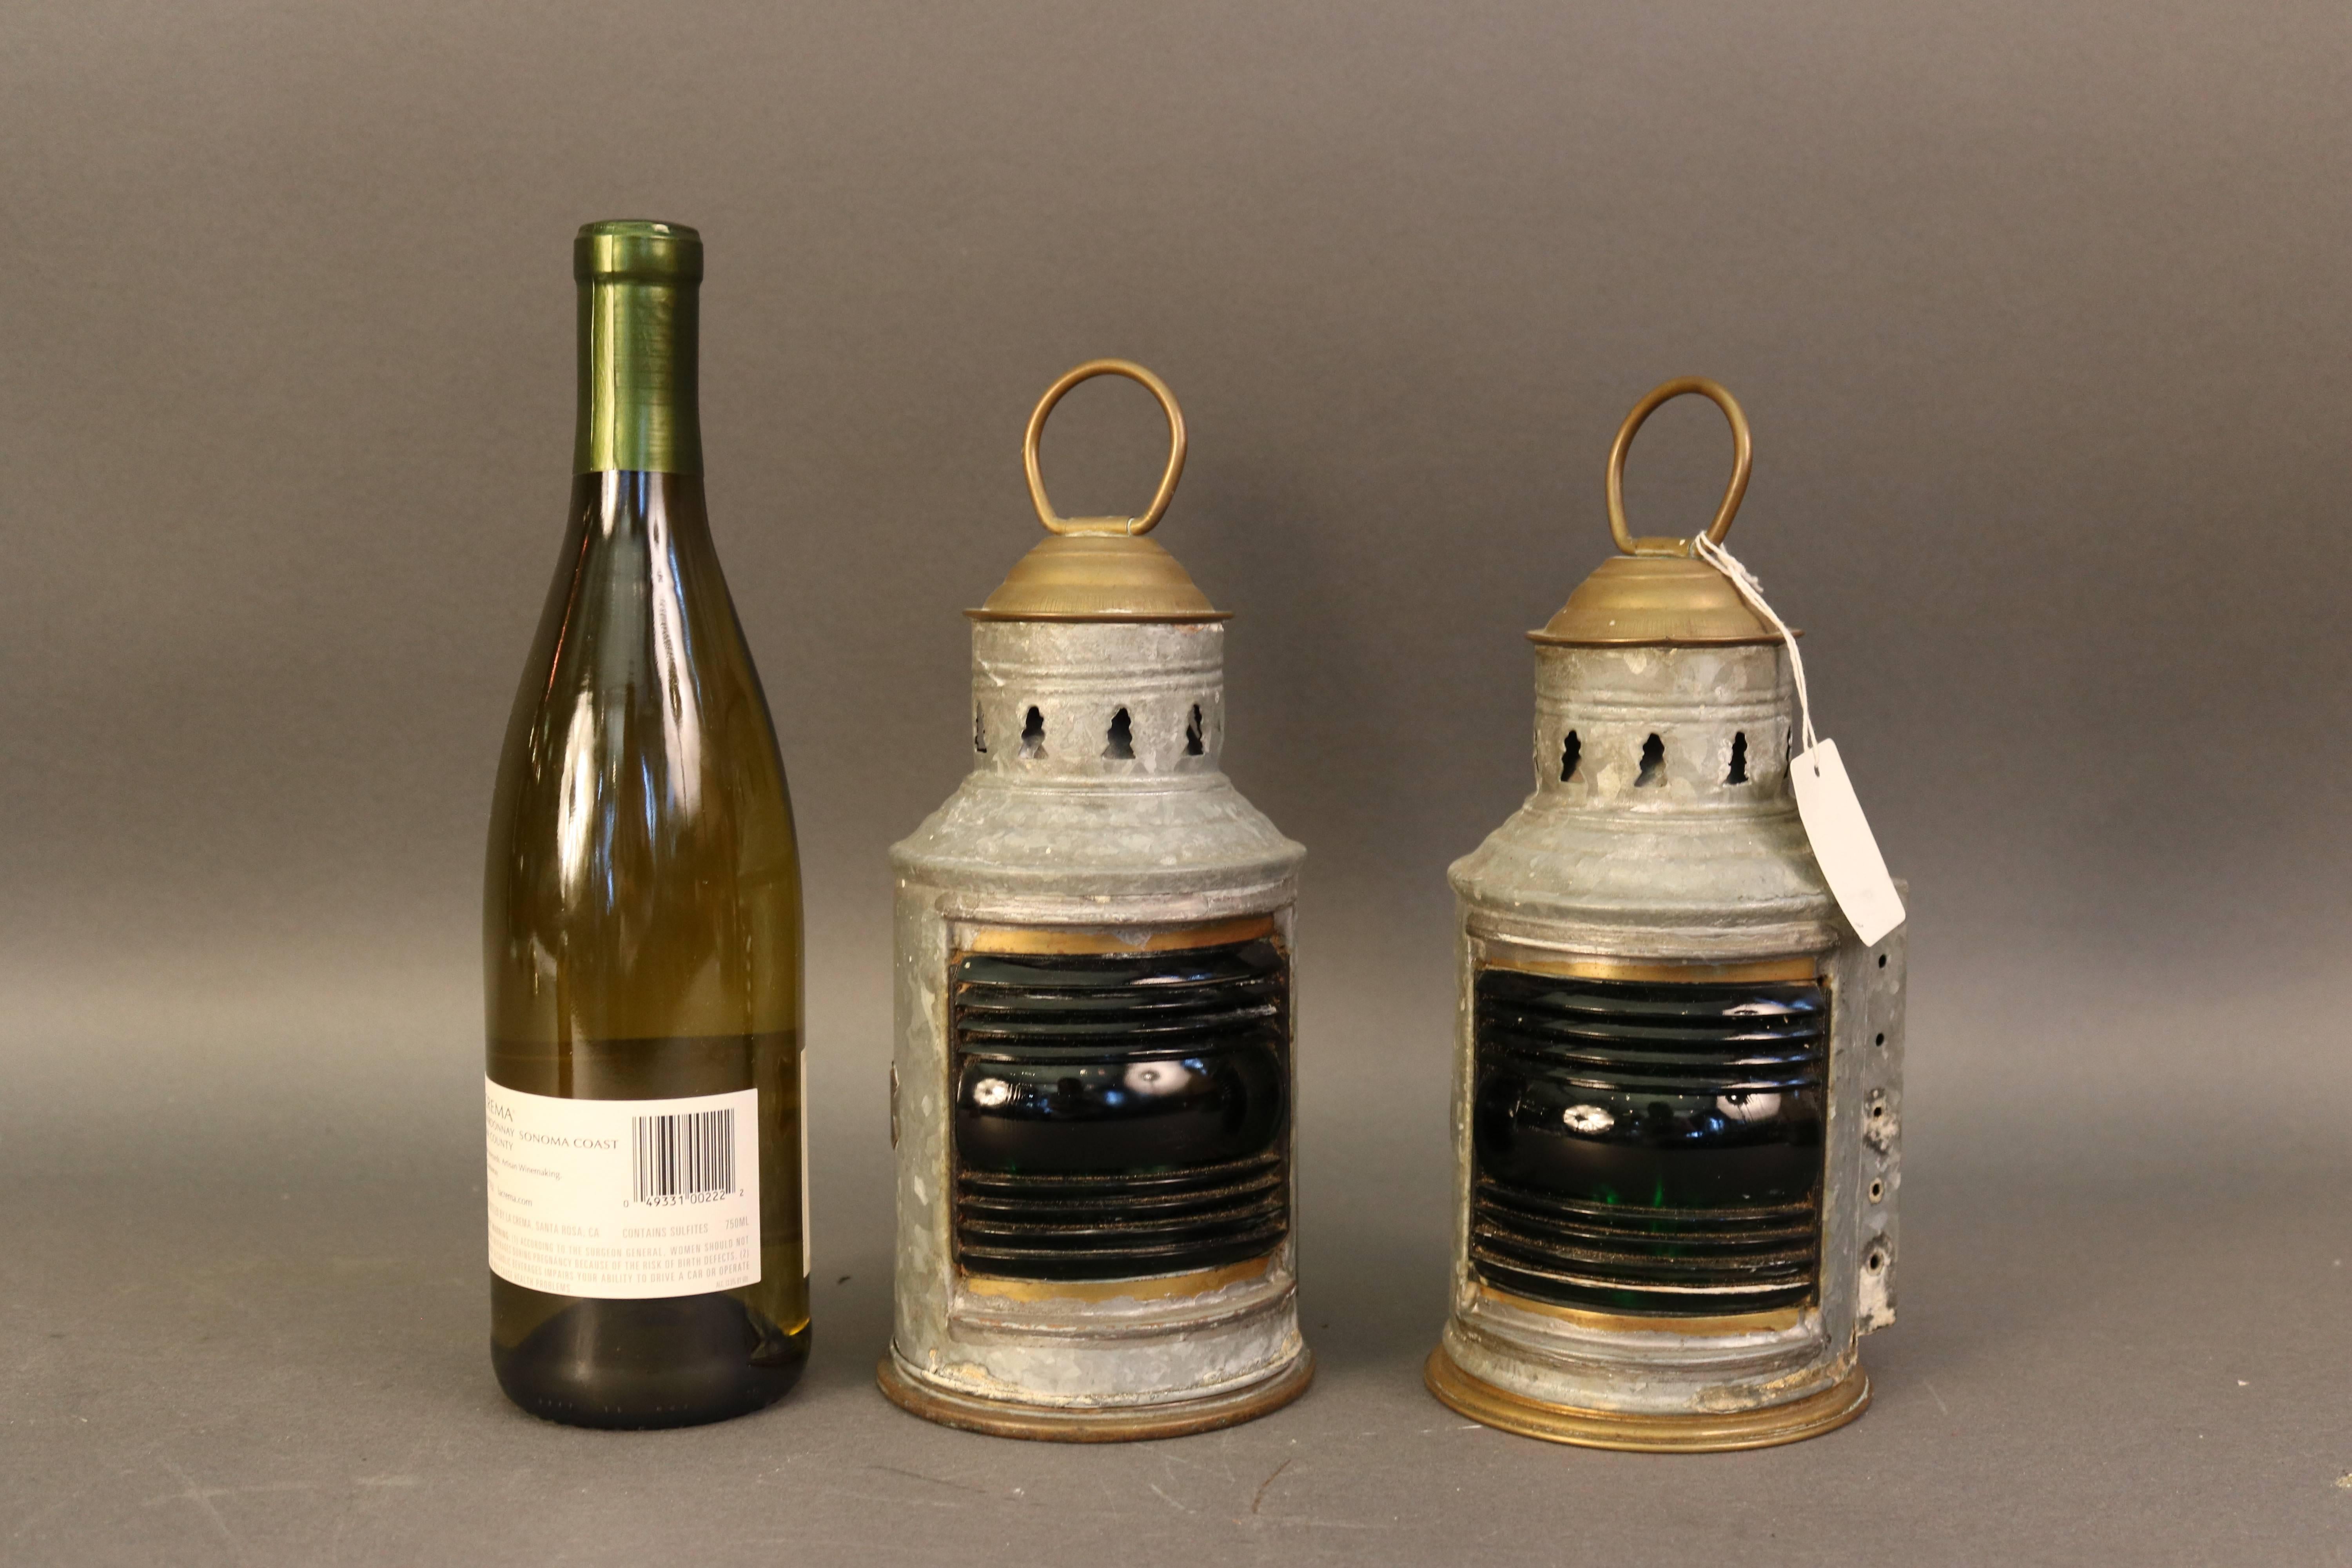 Pair of port and starboard lanterns of galvanized steel by Wilcox Crittendeon, Middletown, CT. Vented top, brass carry handle, rear mounting brackets. 360 degrees. Oil burners. Green and red Fresnel lenses. Overall dimensions: 9.5" H (with